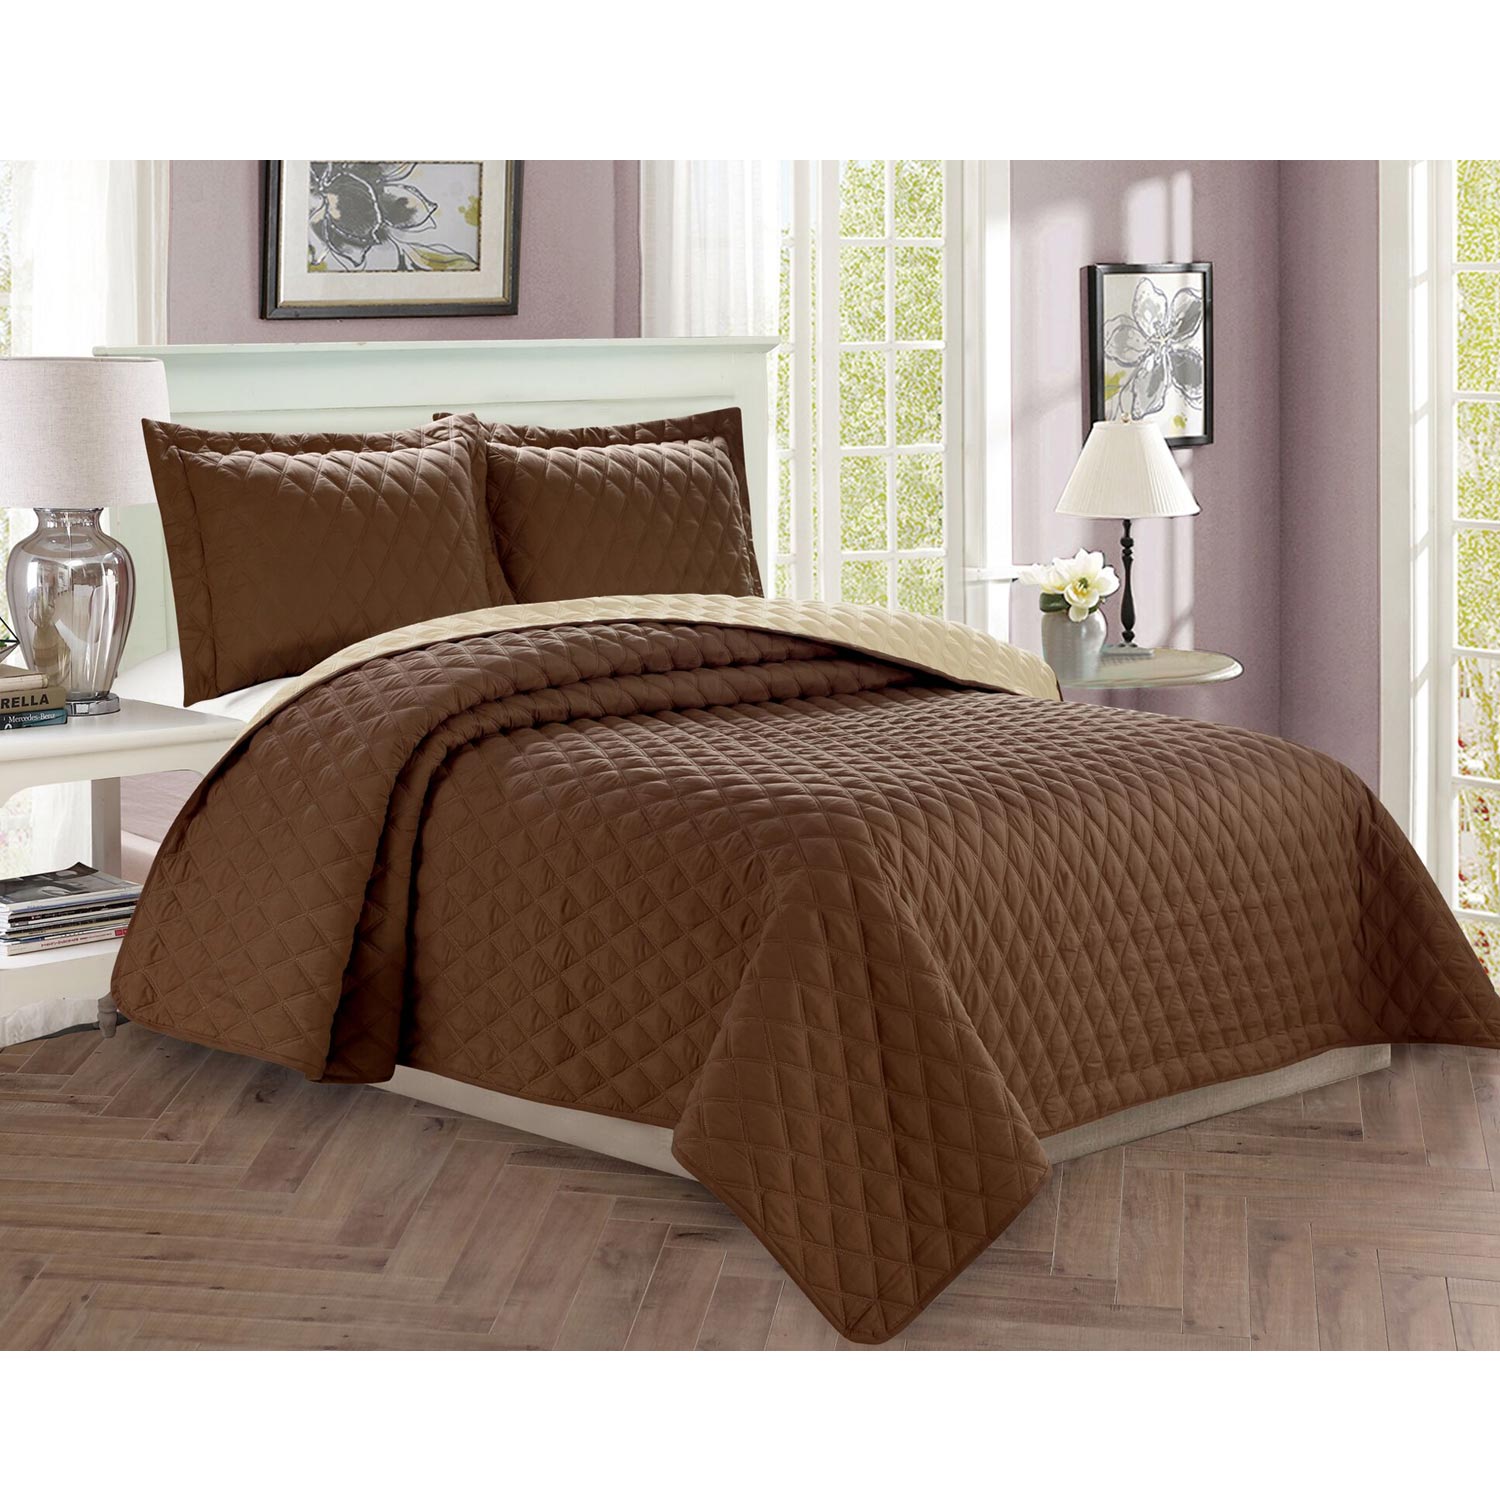 3-Piece Bedspread Coverlet Diamond Design Quilted Set